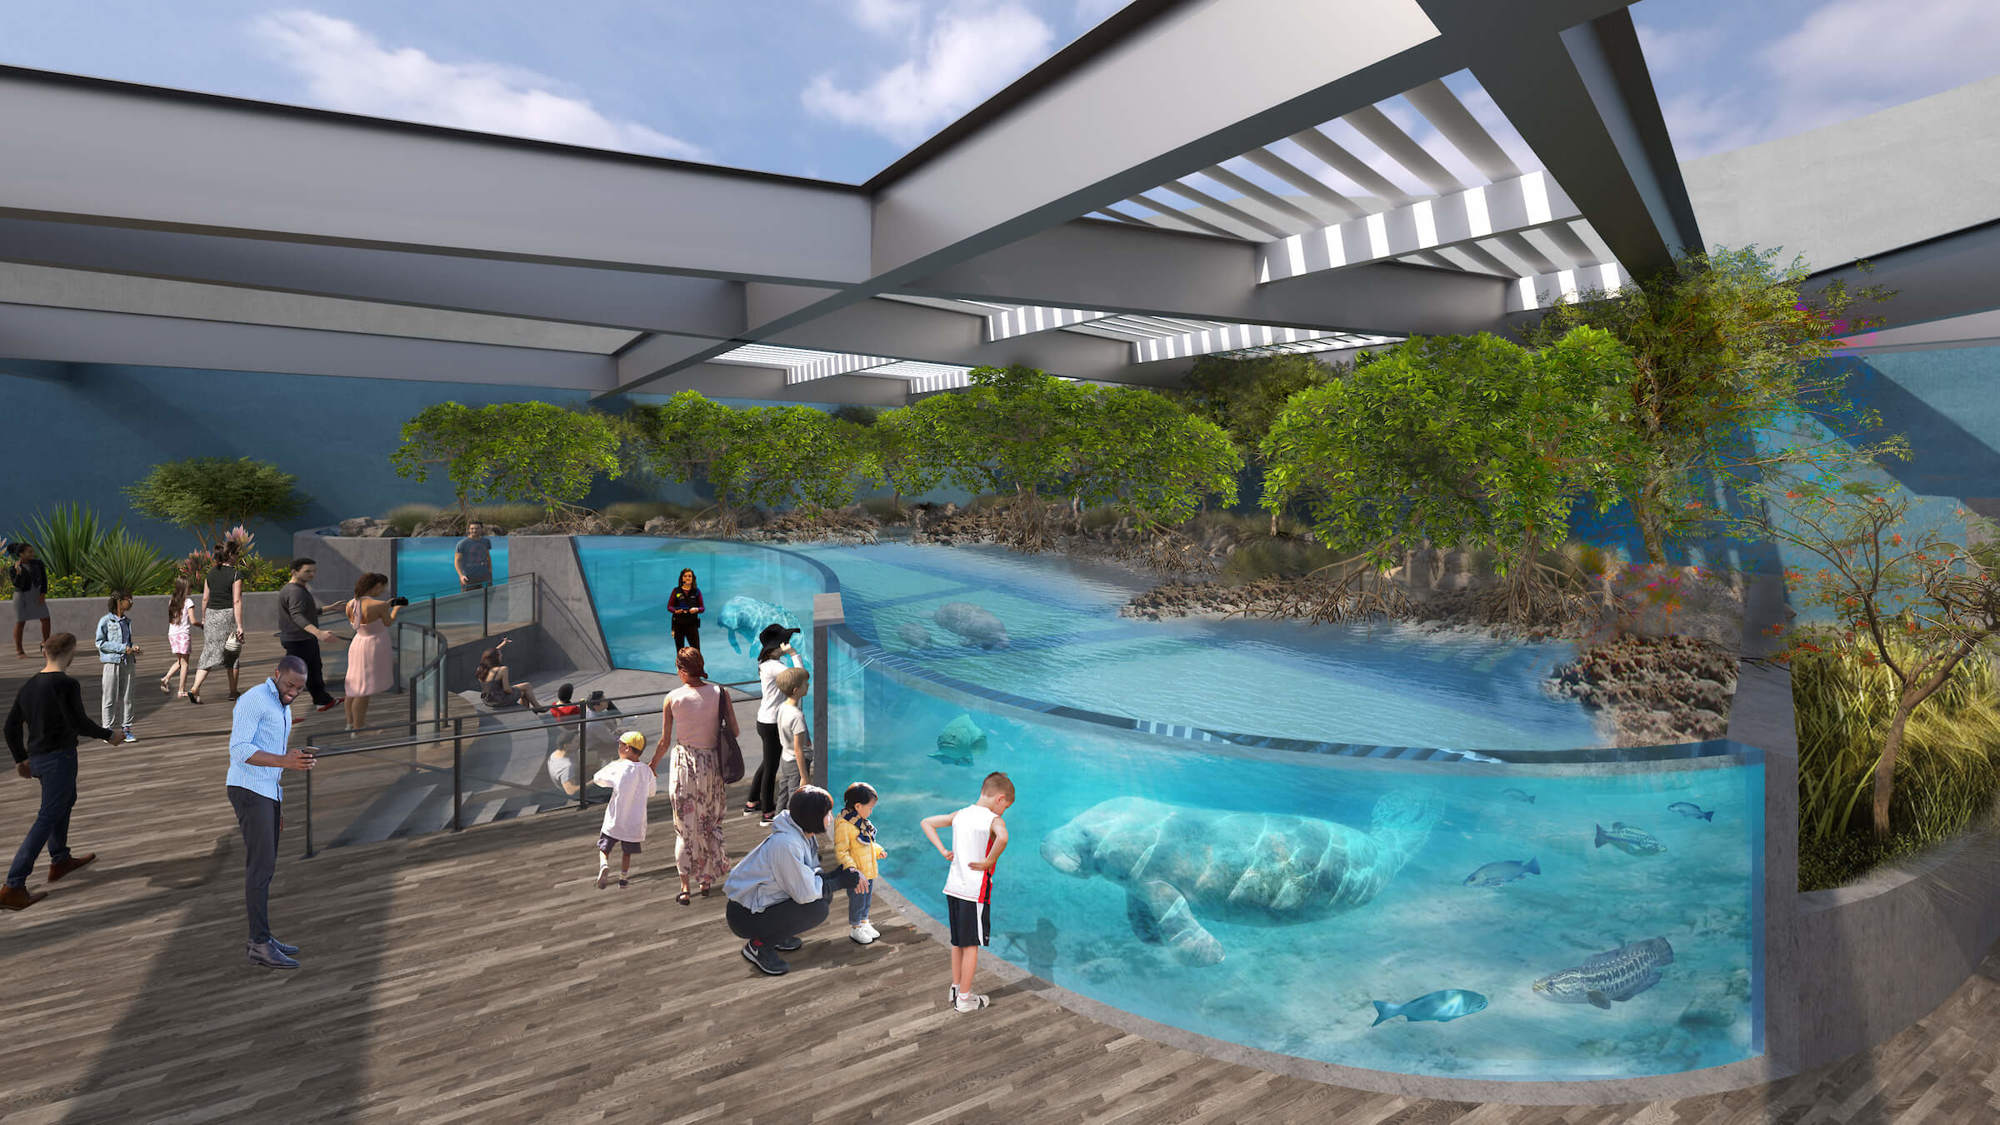 Mote Science Education Aquarium will be built from the inside out